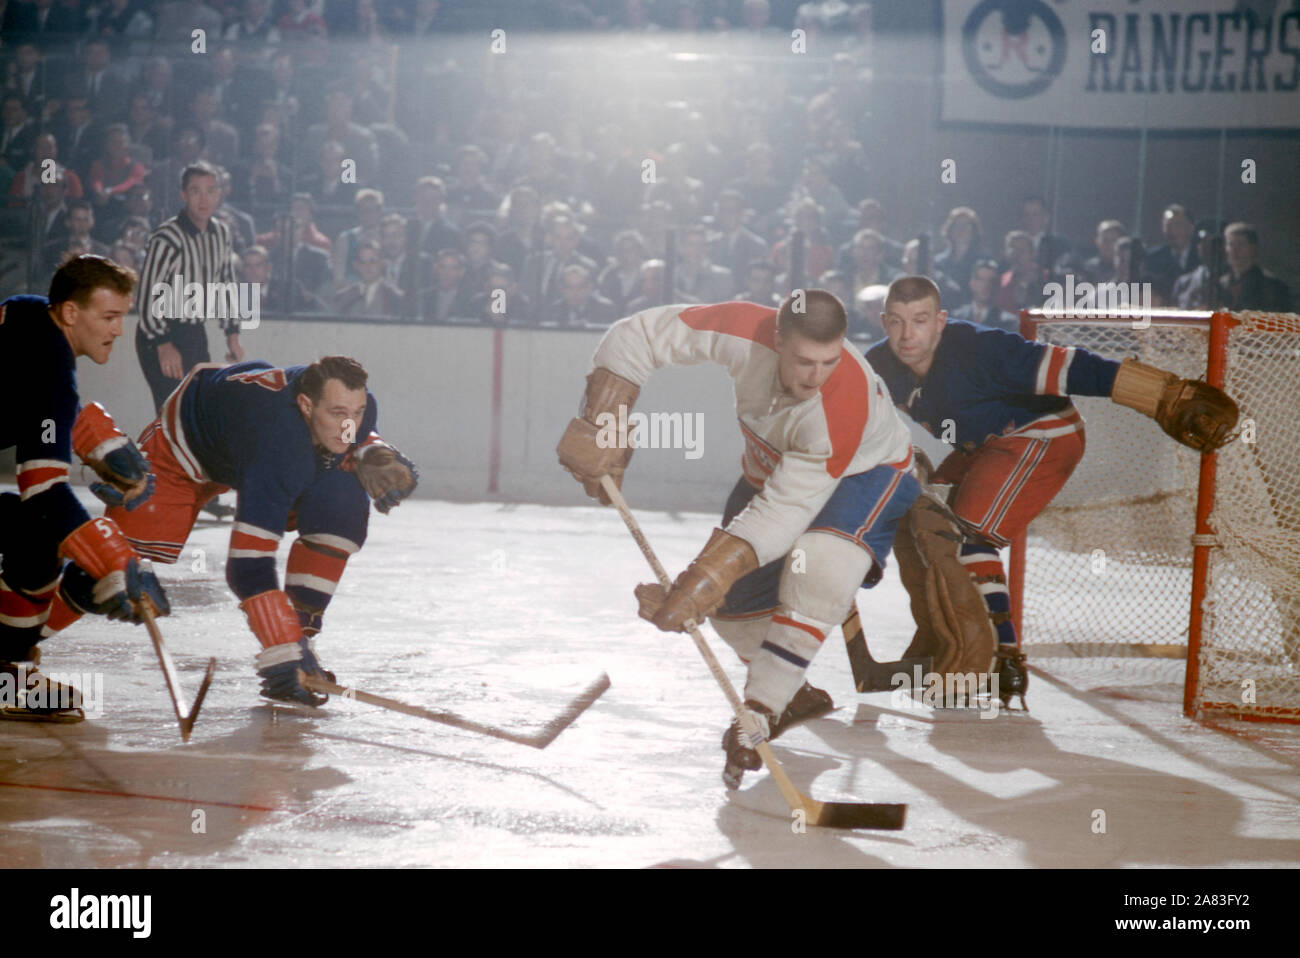 new-york-ny-october-27-jean-guy-talbot-17-of-the-montreal-canadiens-skates-with-the-puck-as-bill-gadsby-4-jack-evans-5-and-goalie-gump-worsley-1-of-the-new-york-rangers-defend-during-an-nhl-game-on-october-27-1957-at-madison-square-garden-in-new-york-new-york-photo-by-hy-peskin-local-caption-jean-guy-talbotbill-gadsbyjack-evansgump-worsley-2A83FY2.jpg